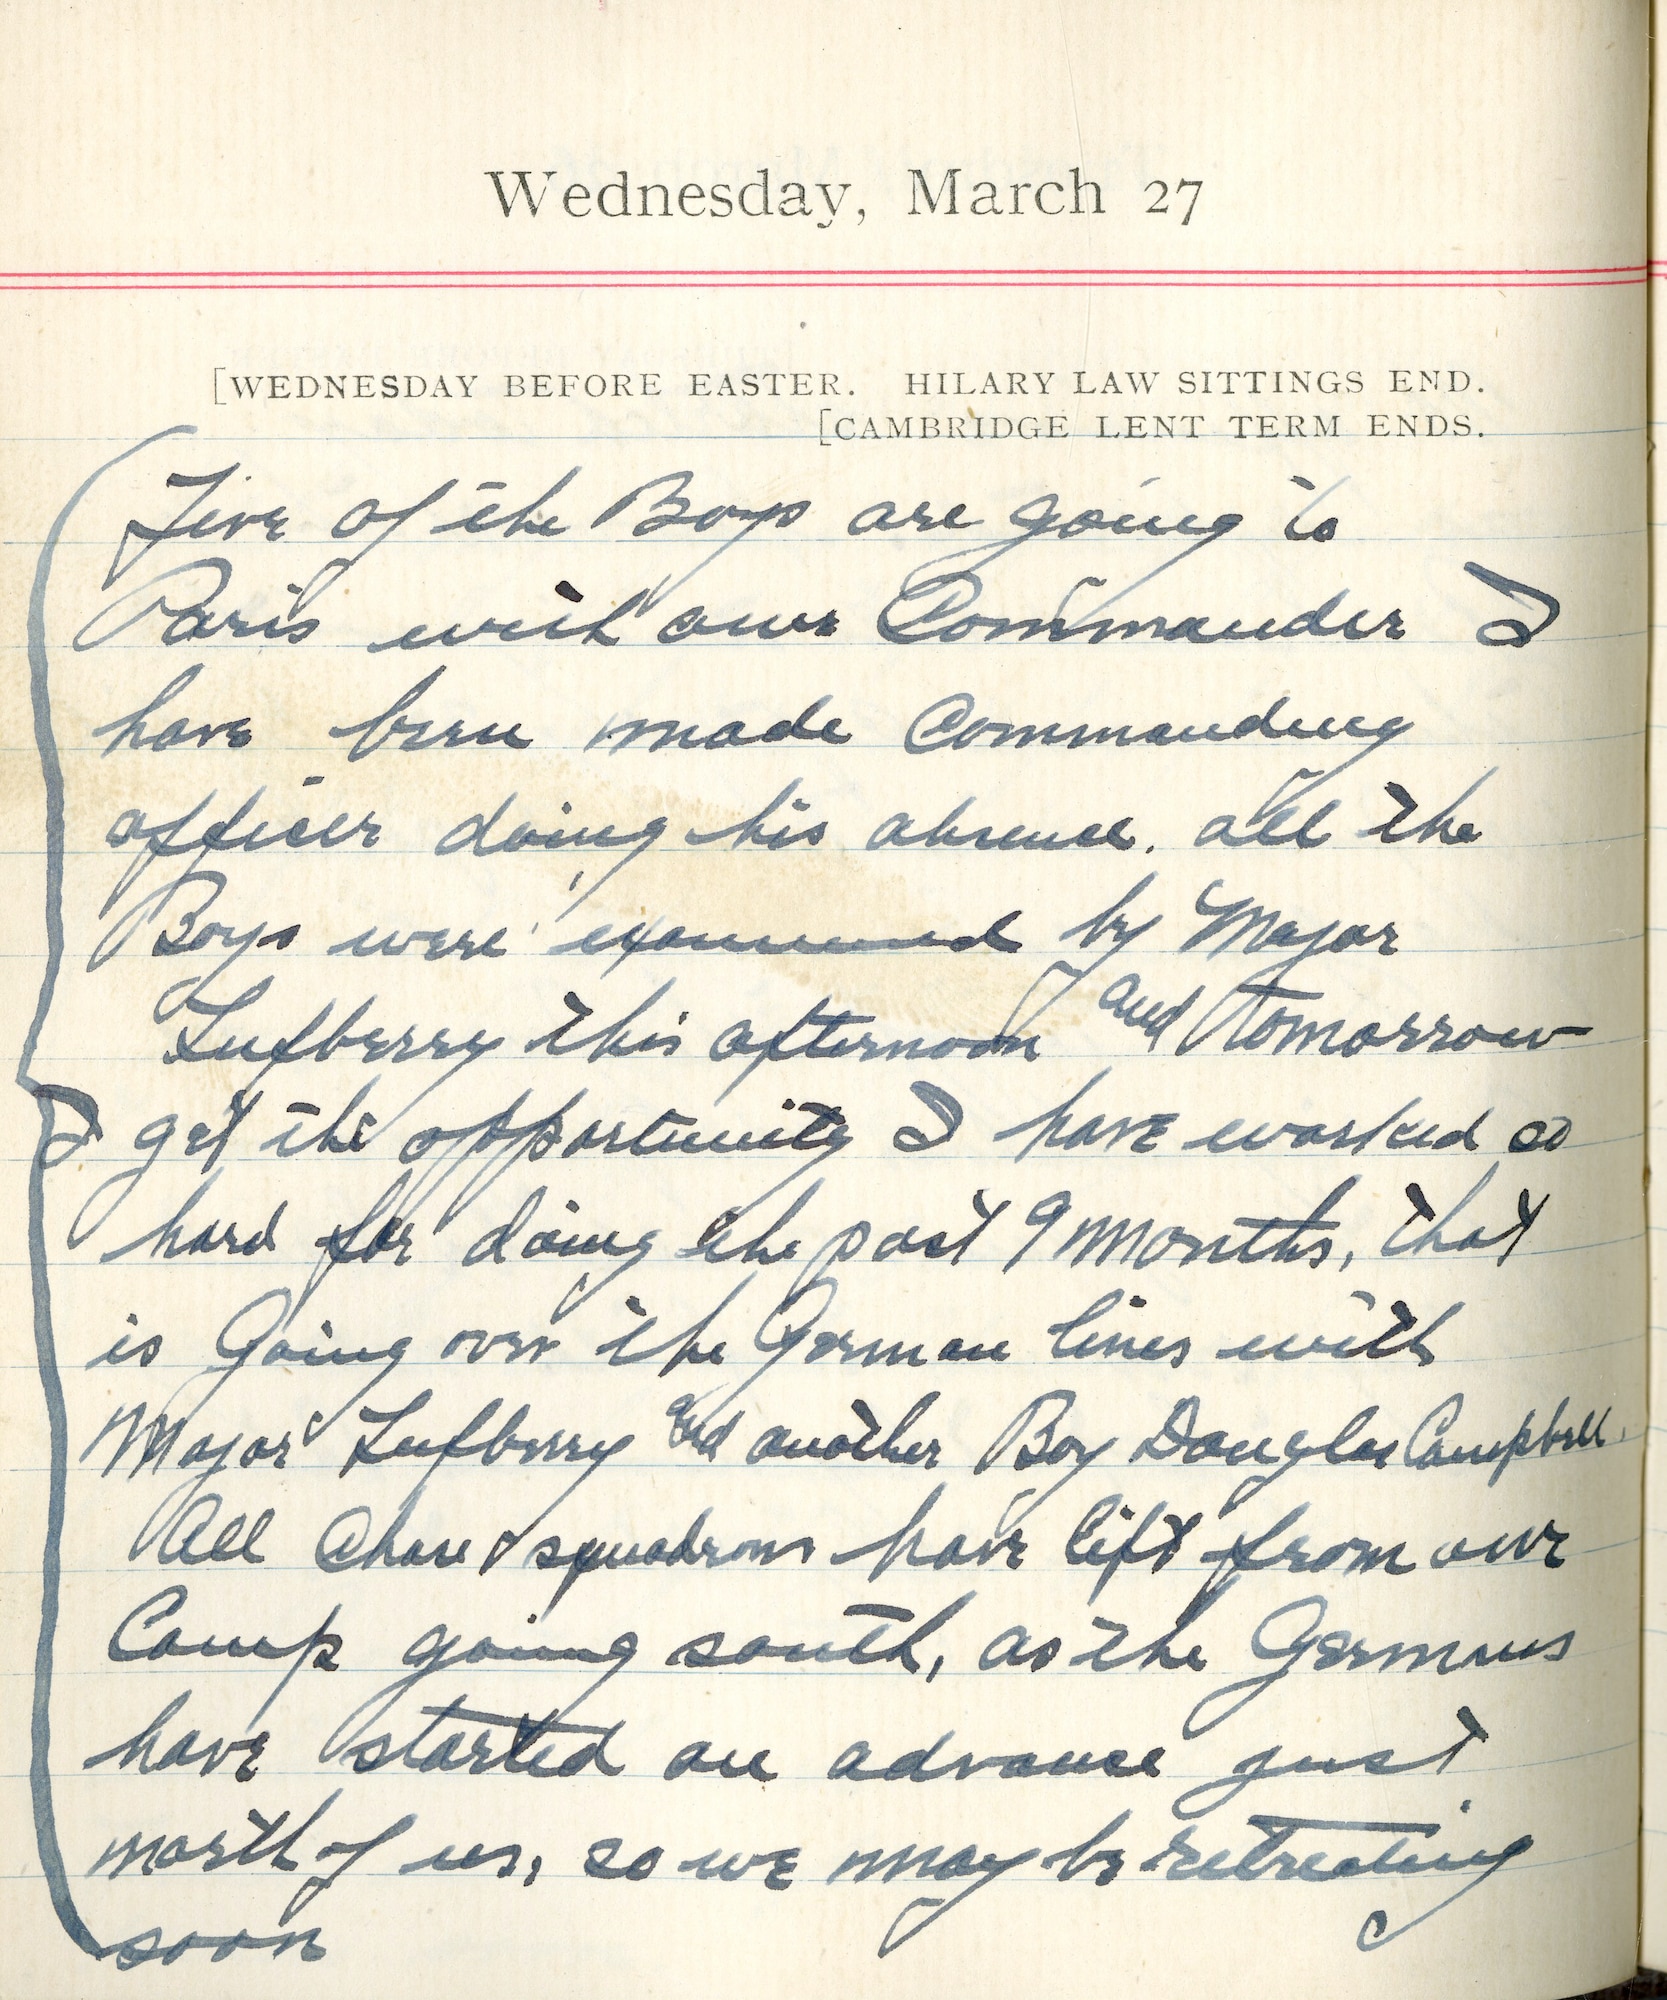 Capt. Edward V. Rickenbacker's 1918 wartime diary entry. (03/27/1918).

Five of the boys are going to Paris with our Commander.  I have been made commanding officer during his absence.  All the boys were examined by Major Lufbery this afternoon and tomorrow I get the opportunity I have worked so hard for during the past 9 months, that is going over the German lines with Major Lufbery and another boy Douglas Campbell.  All chase squadrons have left from our camp going south, as the Germans have started an advance just north of us so we may be retreating soon.